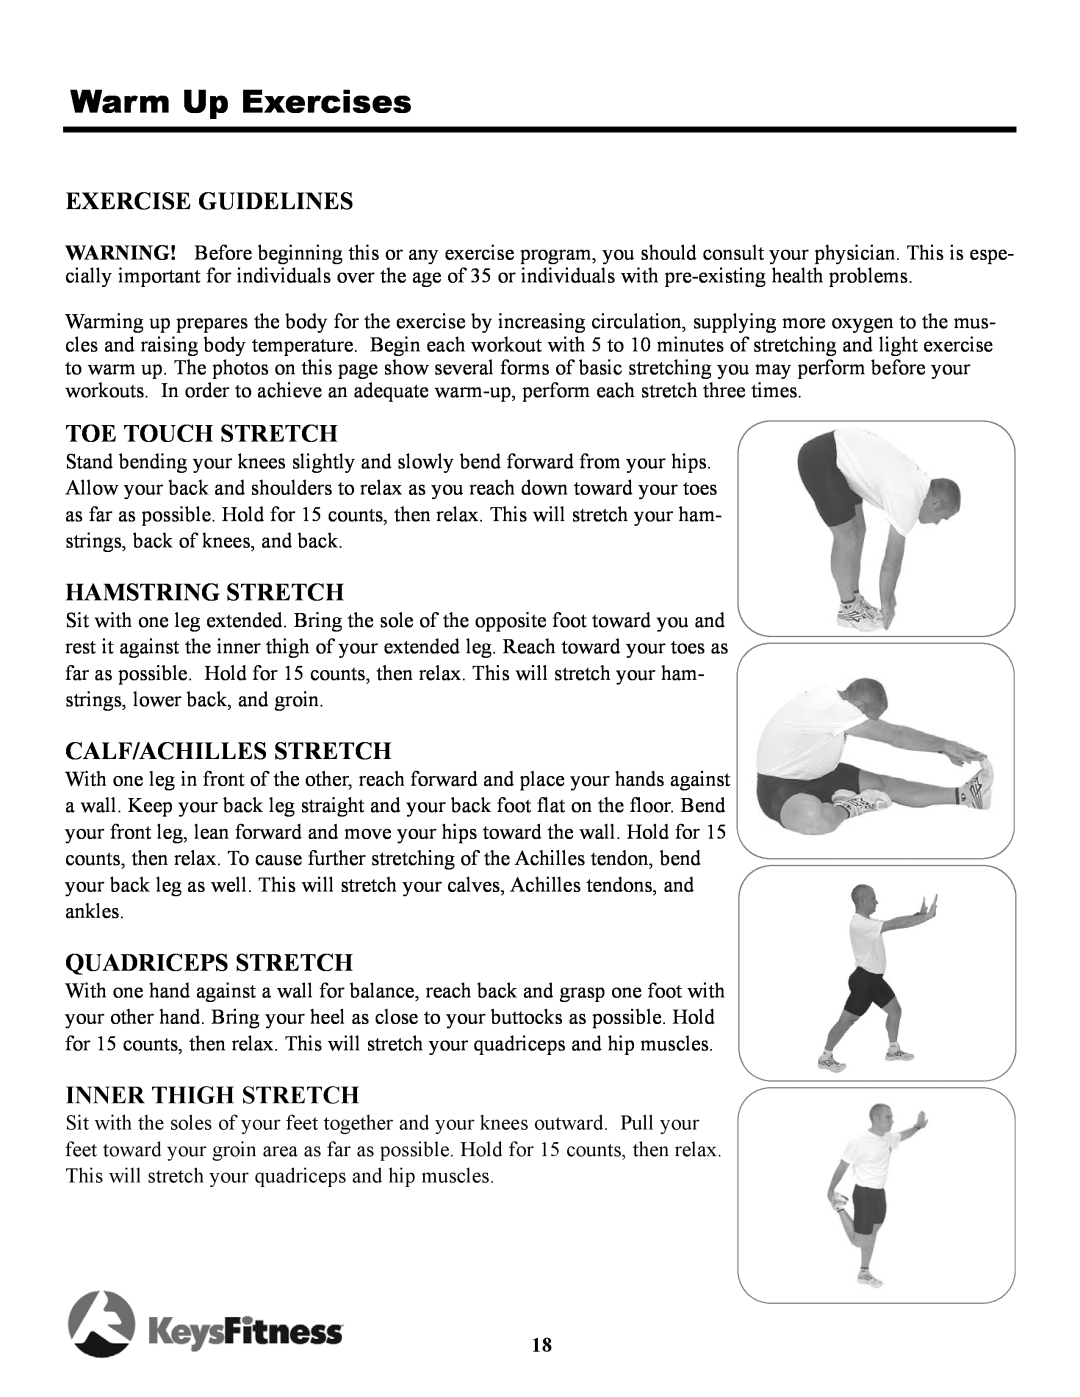 Keys Fitness 700u Warm Up Exercises, Exercise Guidelines, Toe Touch Stretch, Hamstring Stretch, Calf/Achilles Stretch 